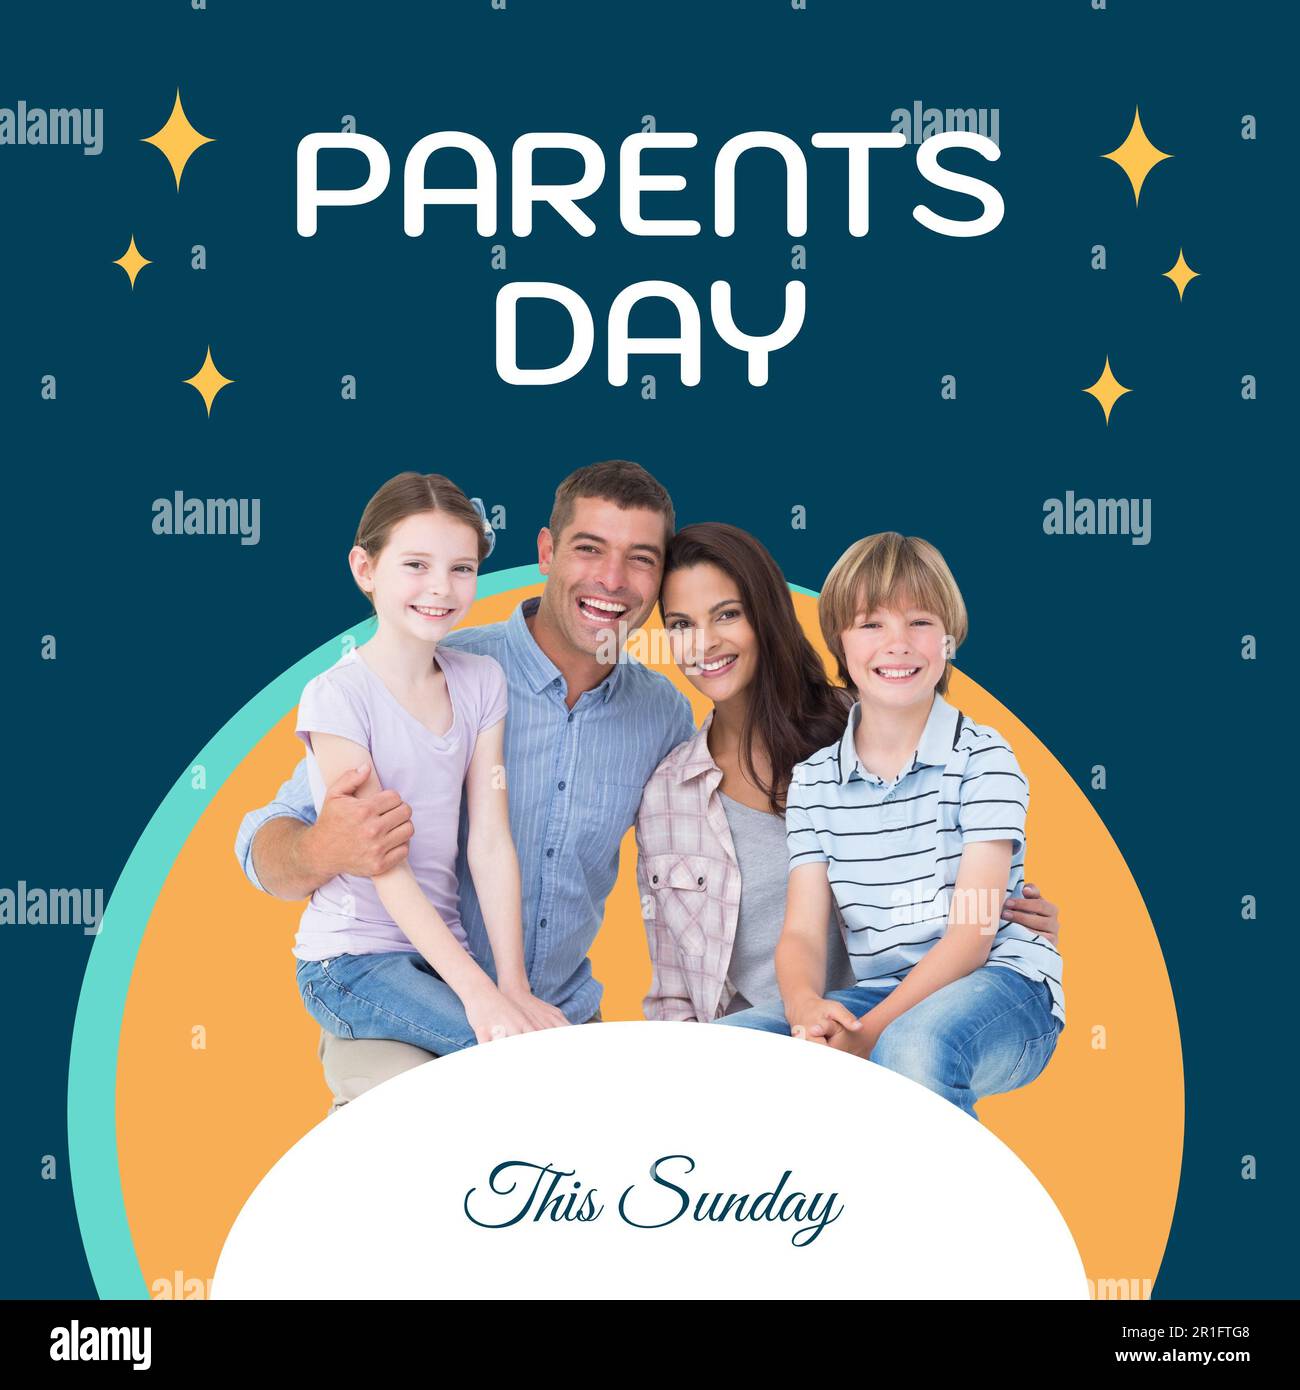 Composition of parents day text over caucasian couple with son and daughter Stock Photo